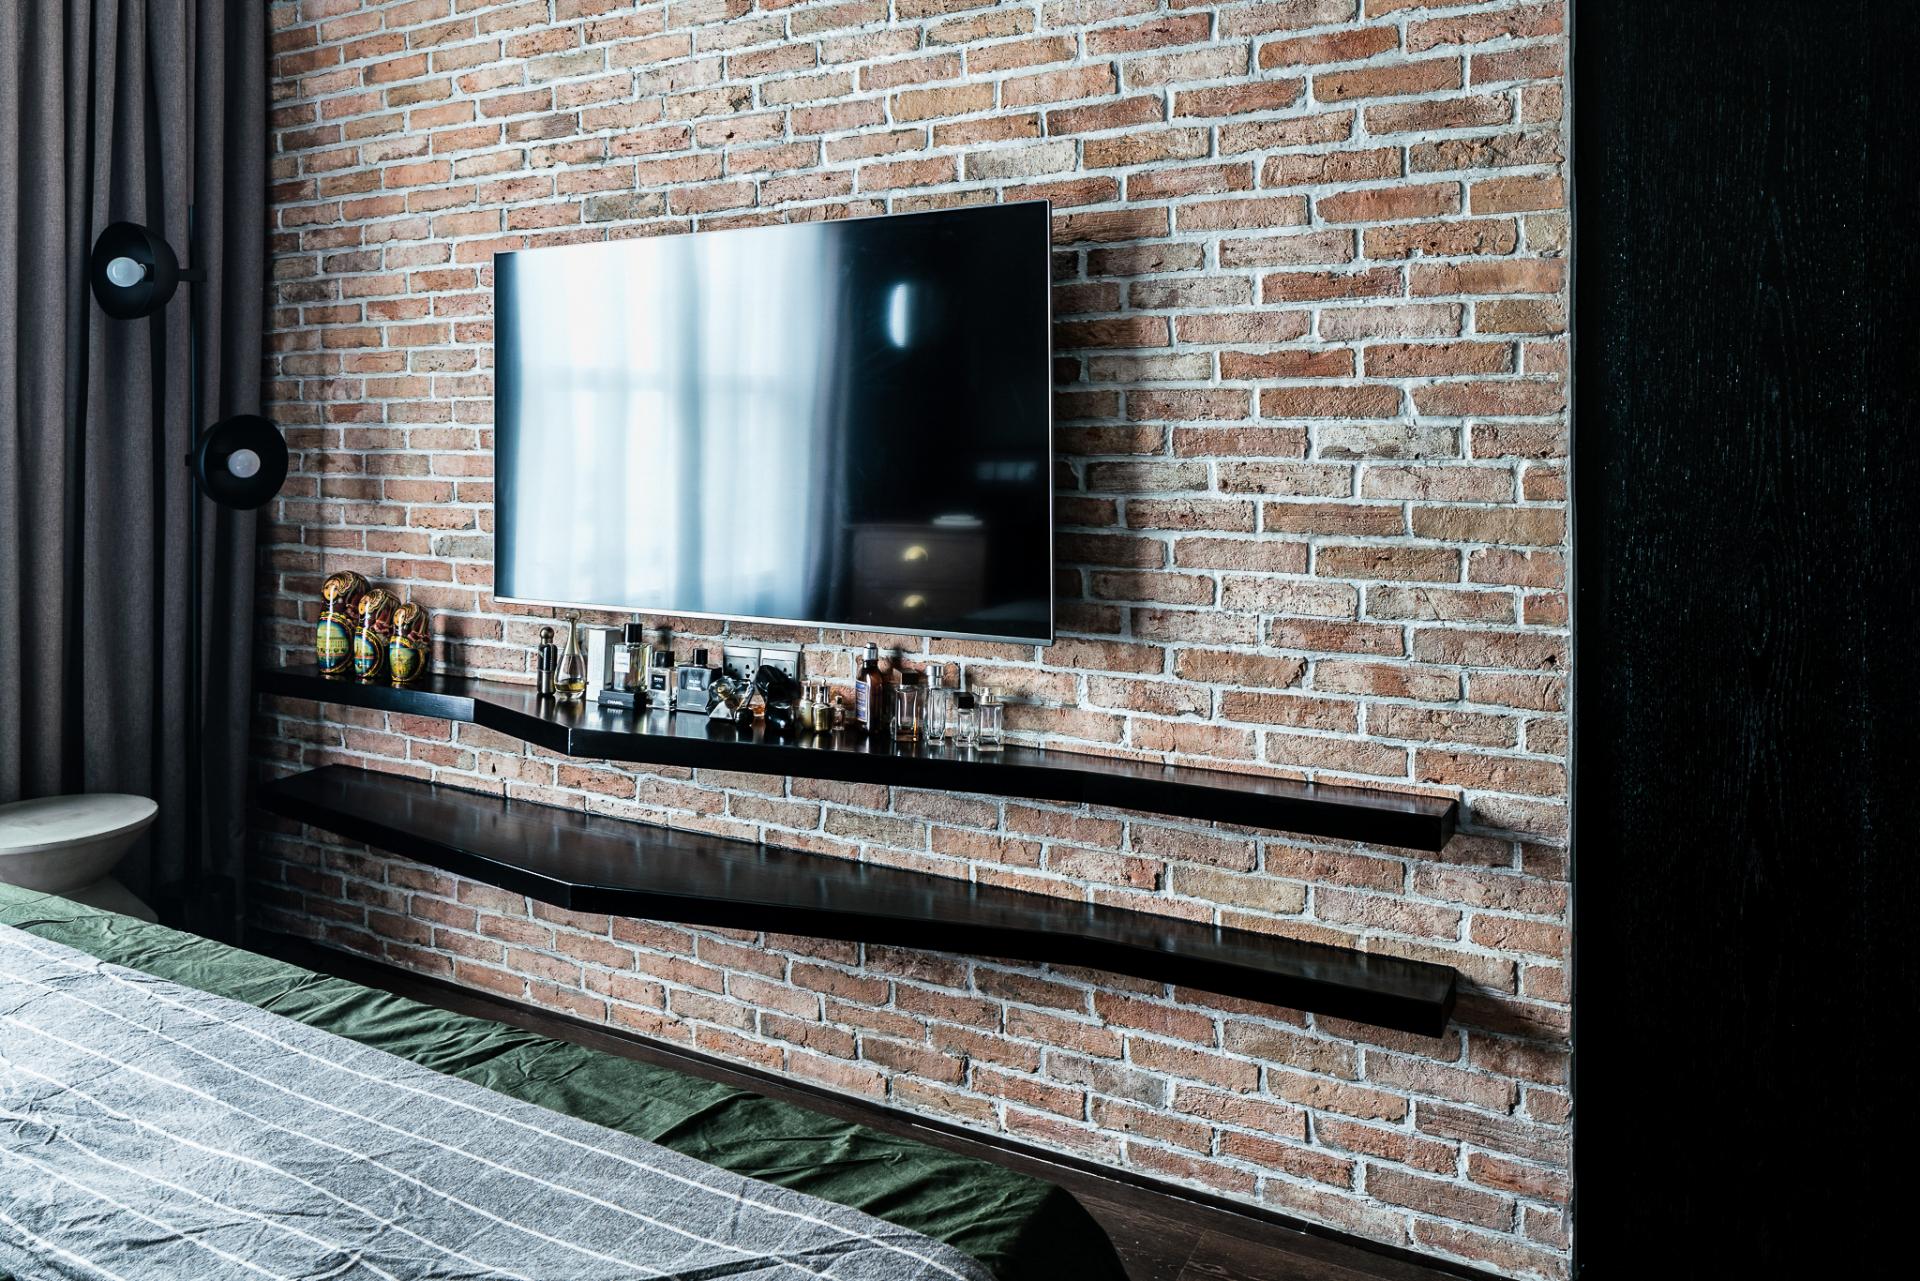 This 1,076 sq. ft. apartment has an industrial accent and a rustic 